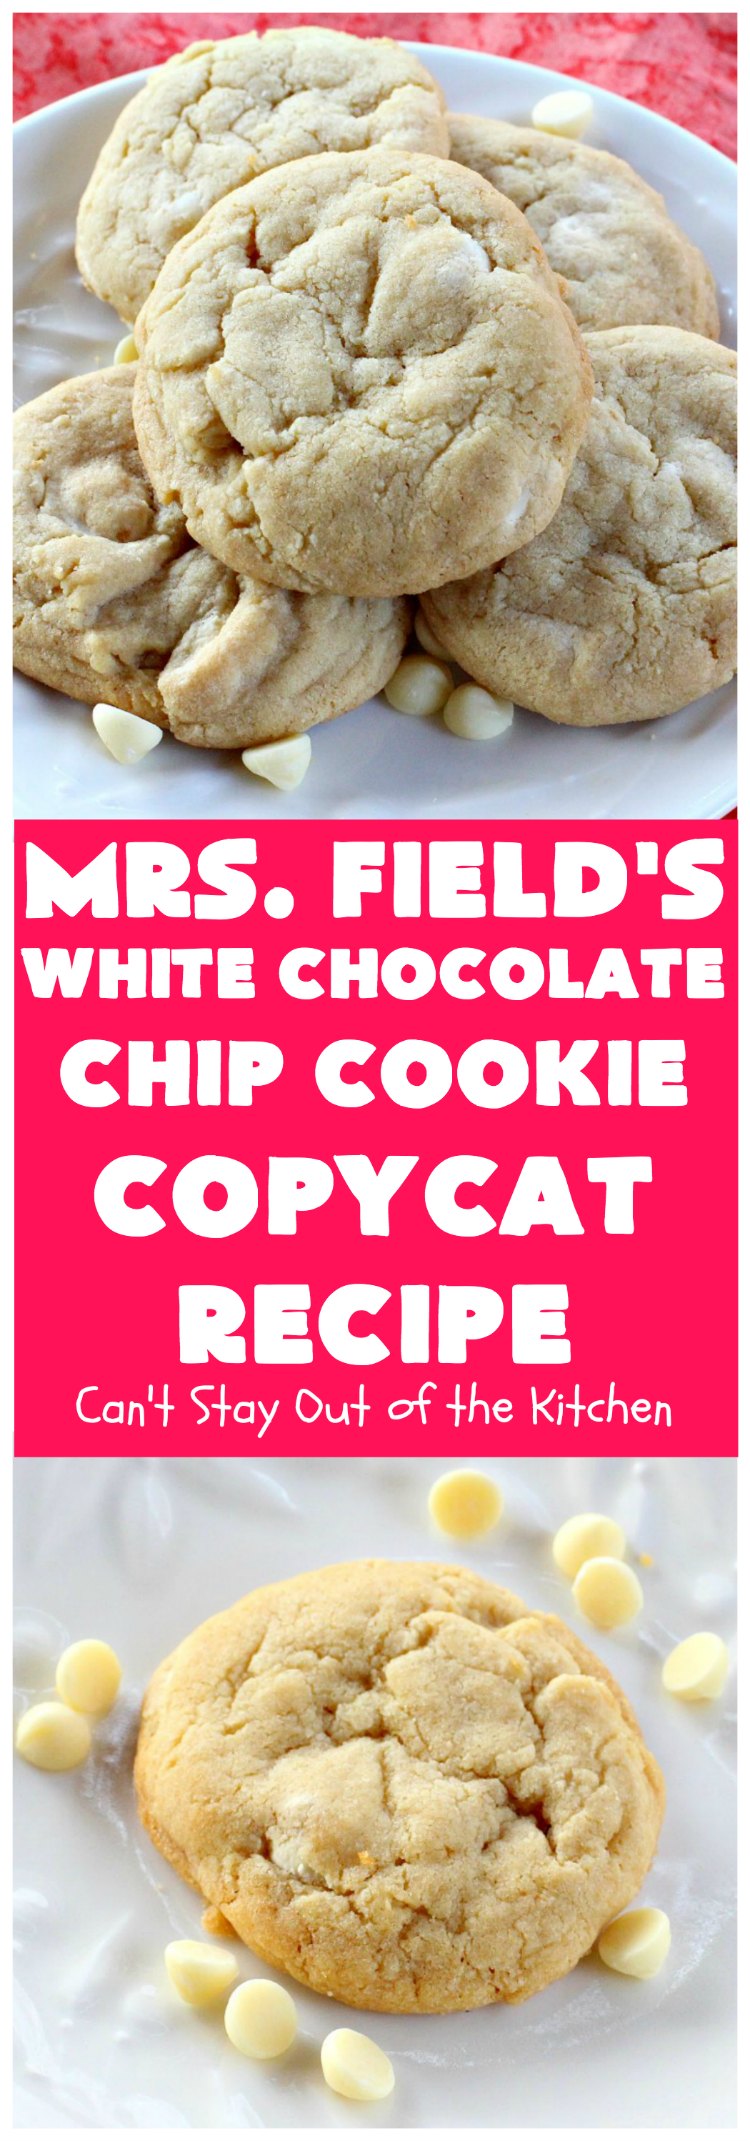 Mrs. Field's White Chocolate Chip Cookie Copycat Recipe | Can't Stay Out of the Kitchen